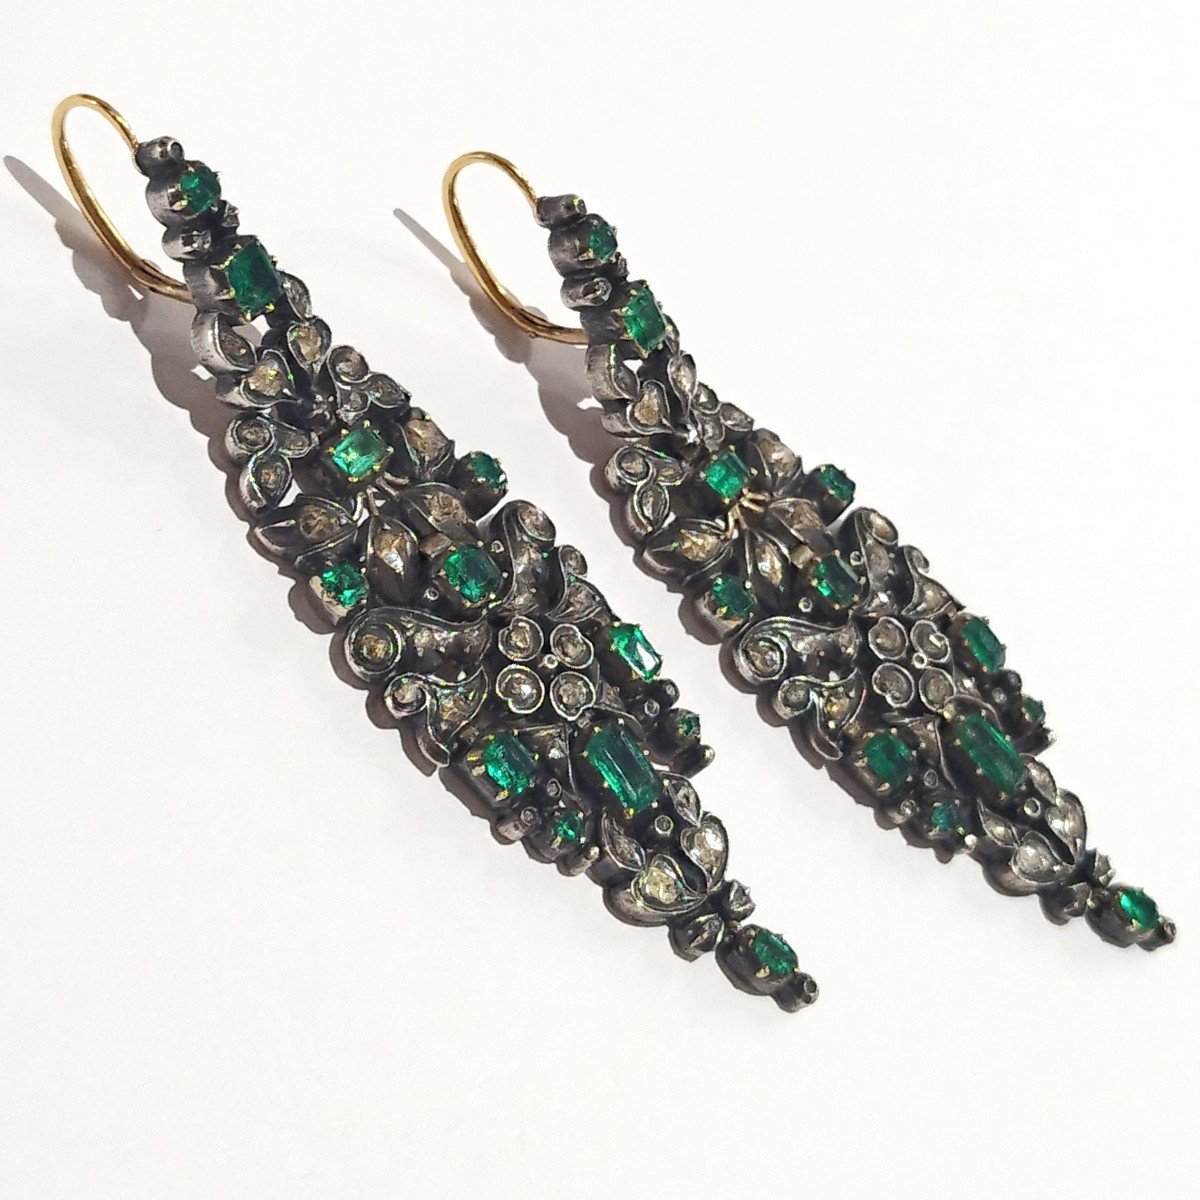 Catalan Earrings From The End Of The 18th Century. Diamonds, Emeralds, 18k Gold And Silver.-photo-3